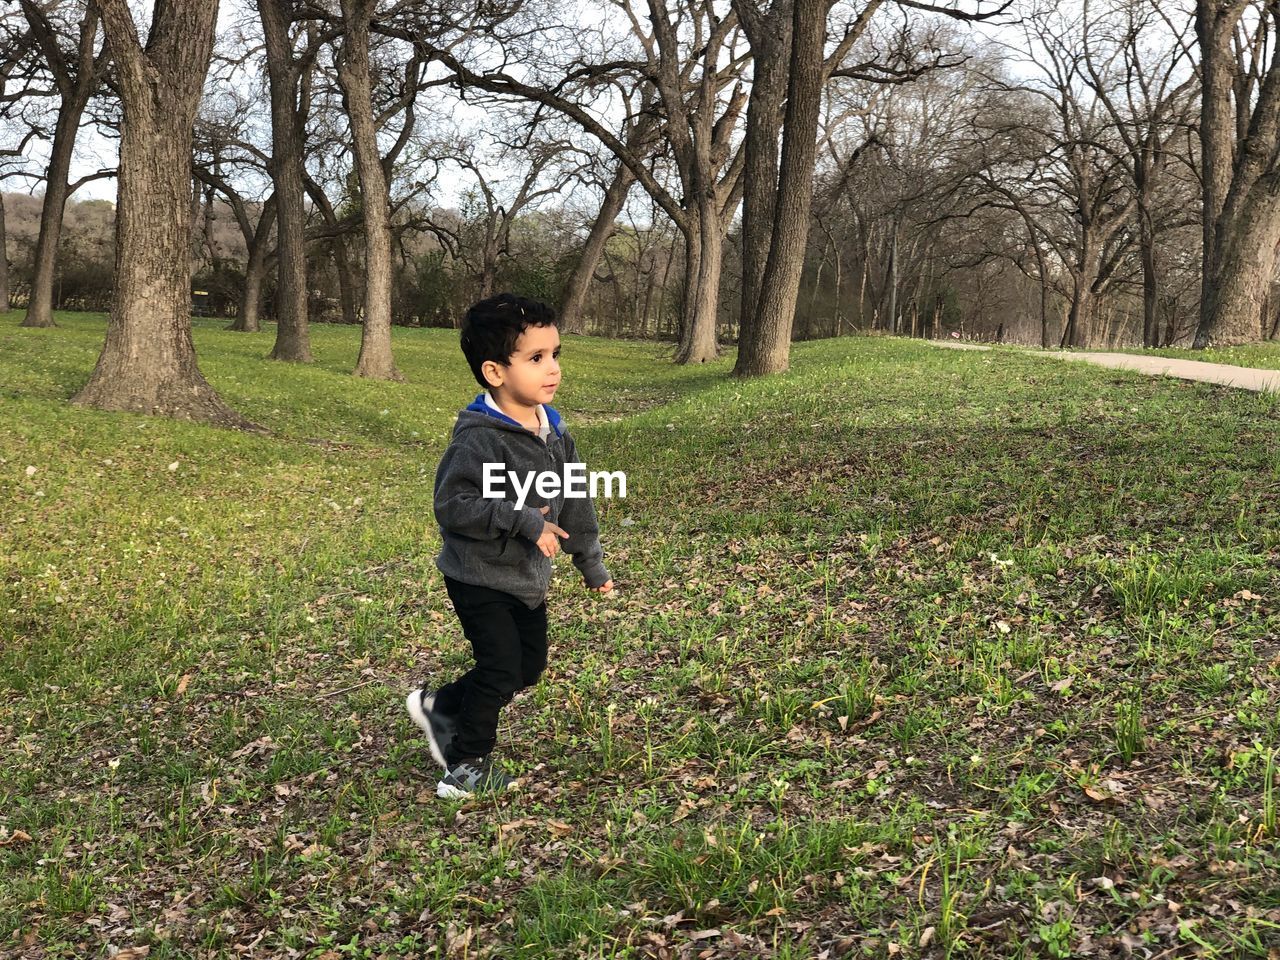 Boy playing in park